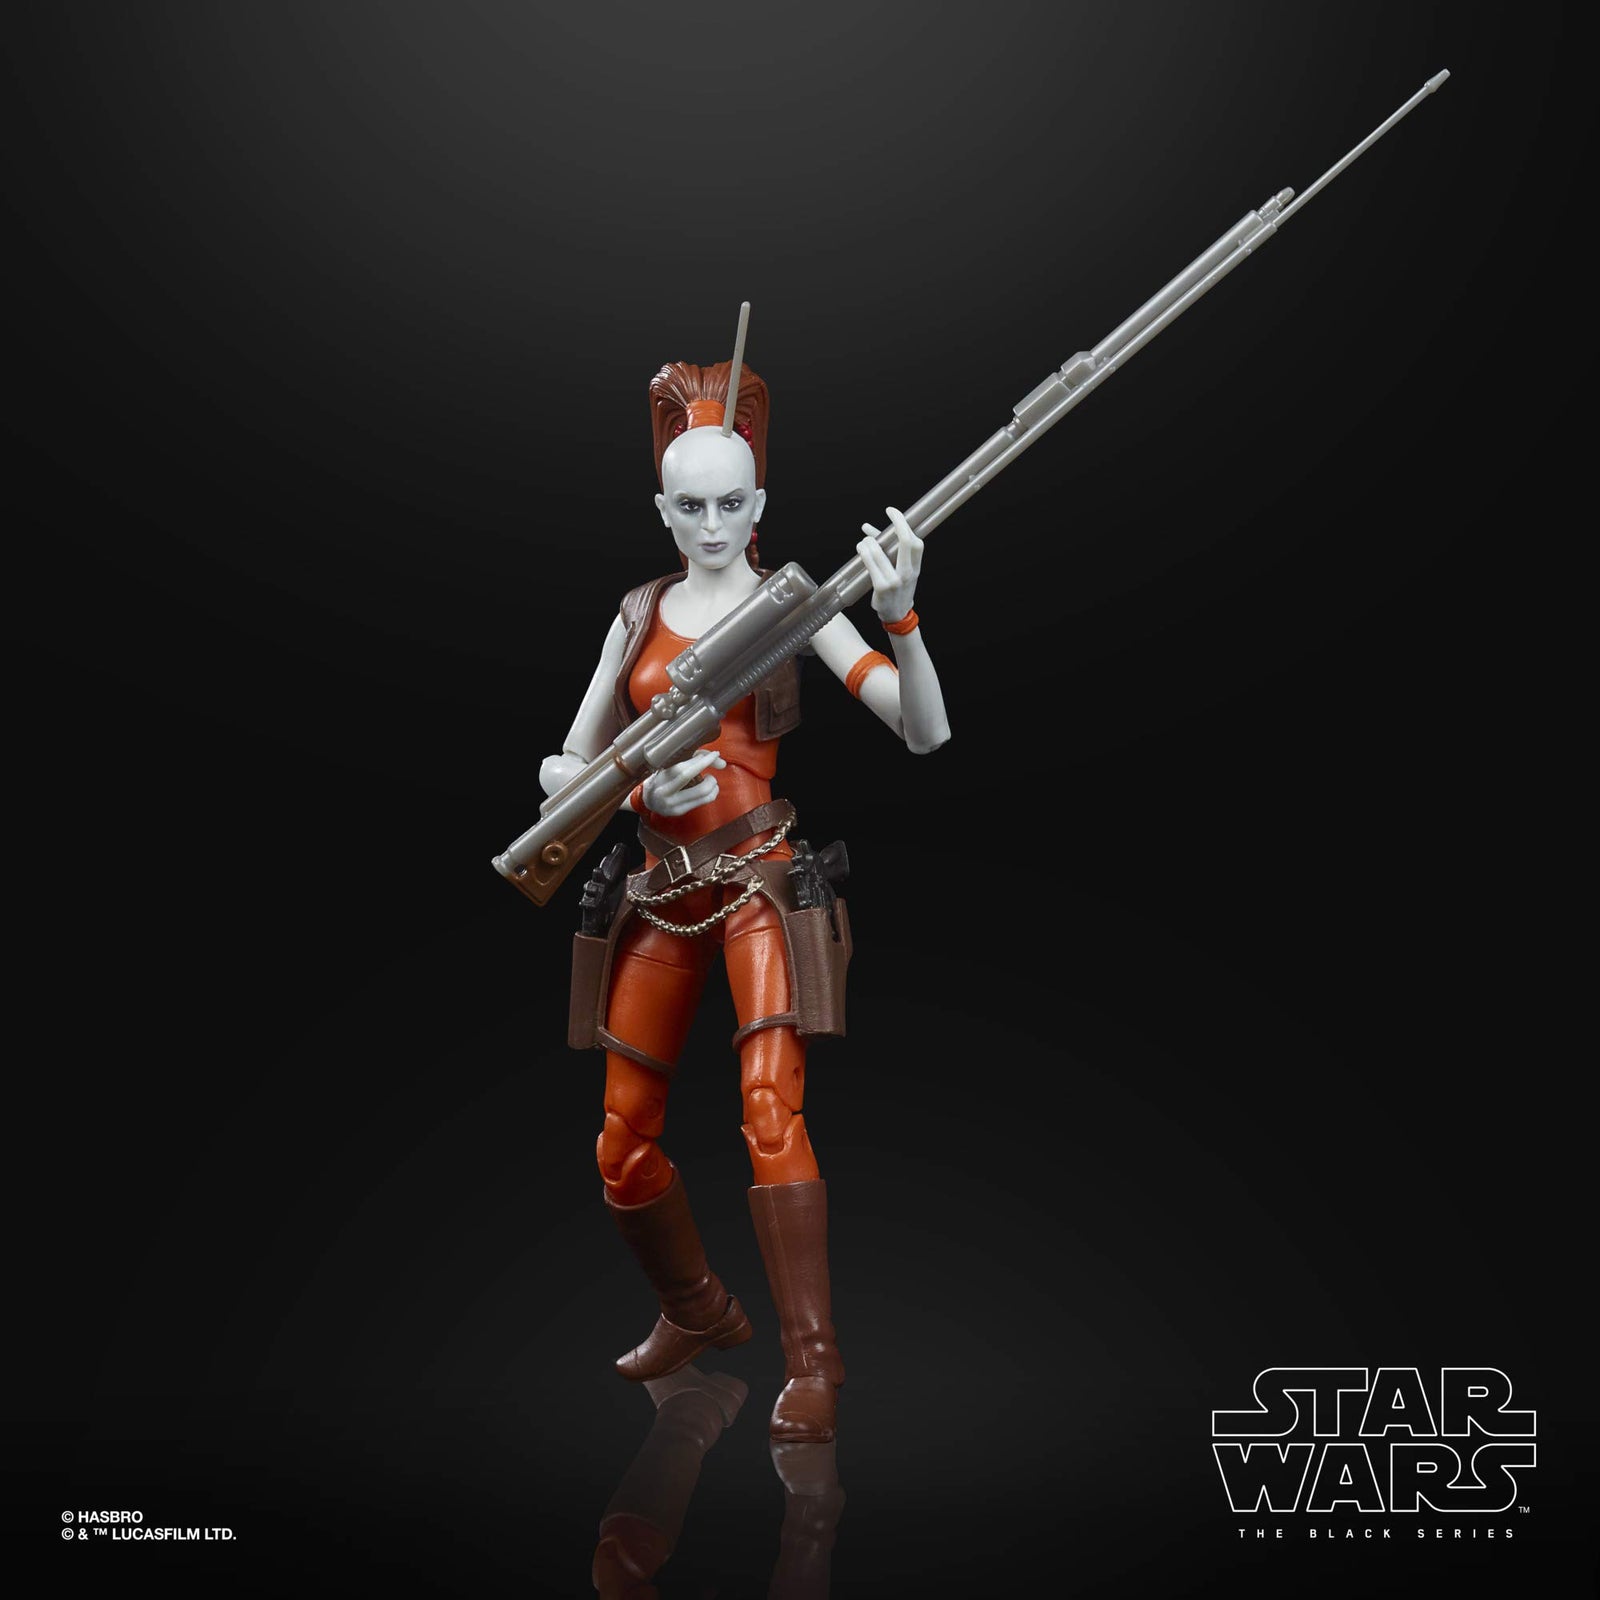 Star Wars The Black Series Aurra Sing Toy 6-Inch-Scale The Clone Wars Collectible Action Figure, Toys for Kids Ages 4 and Up,F1870